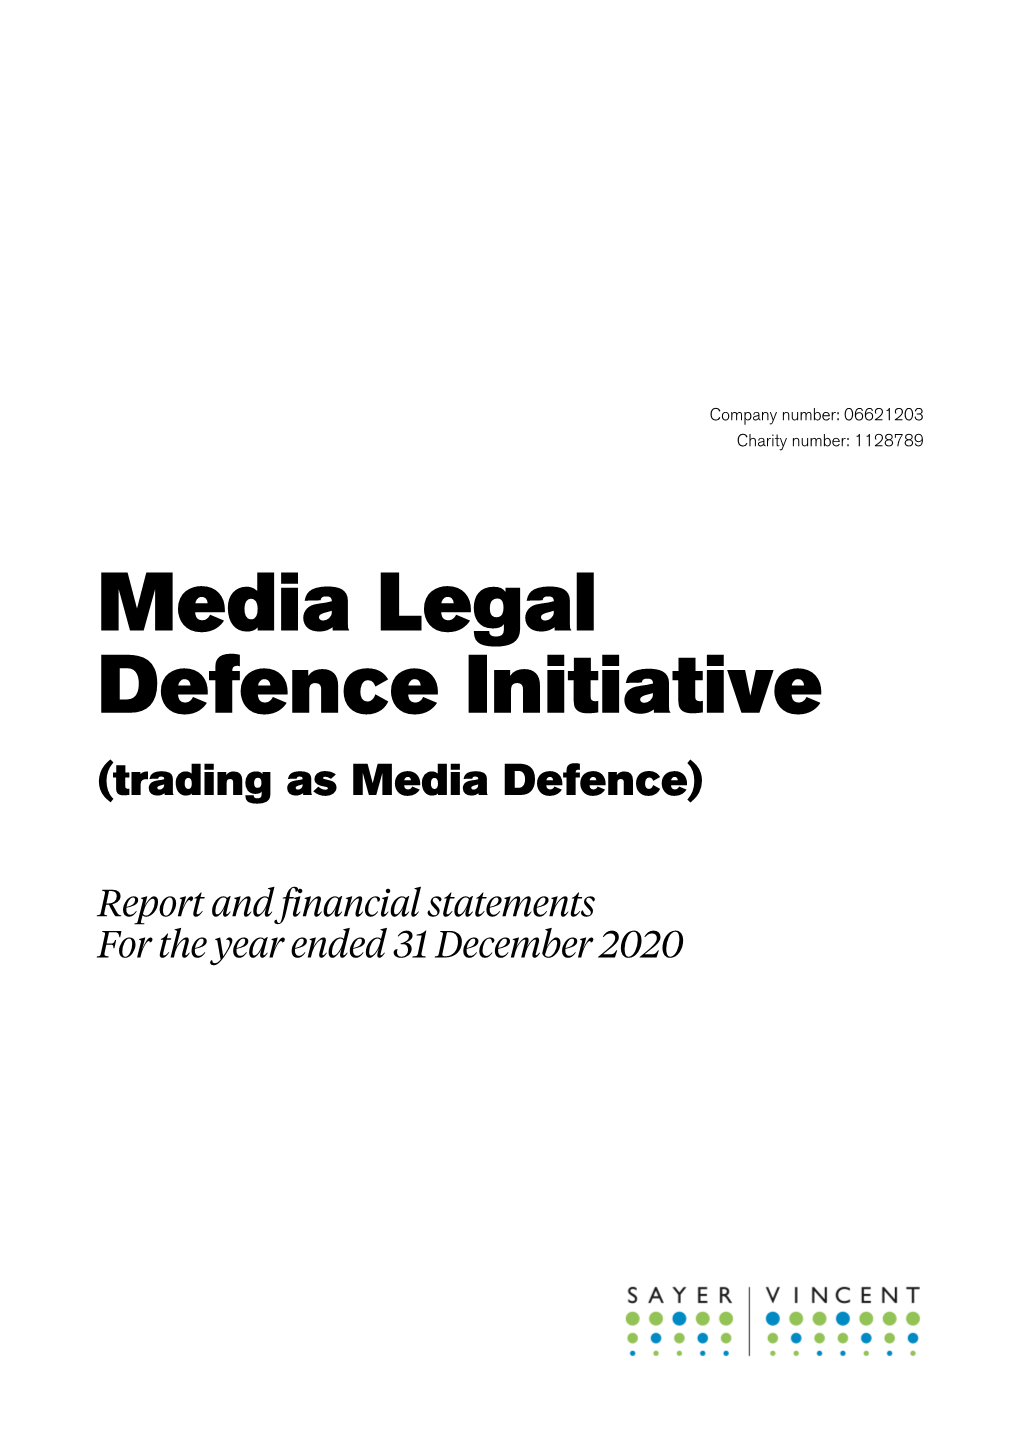 Media Legal Defence Initiative (Trading As Media Defence)